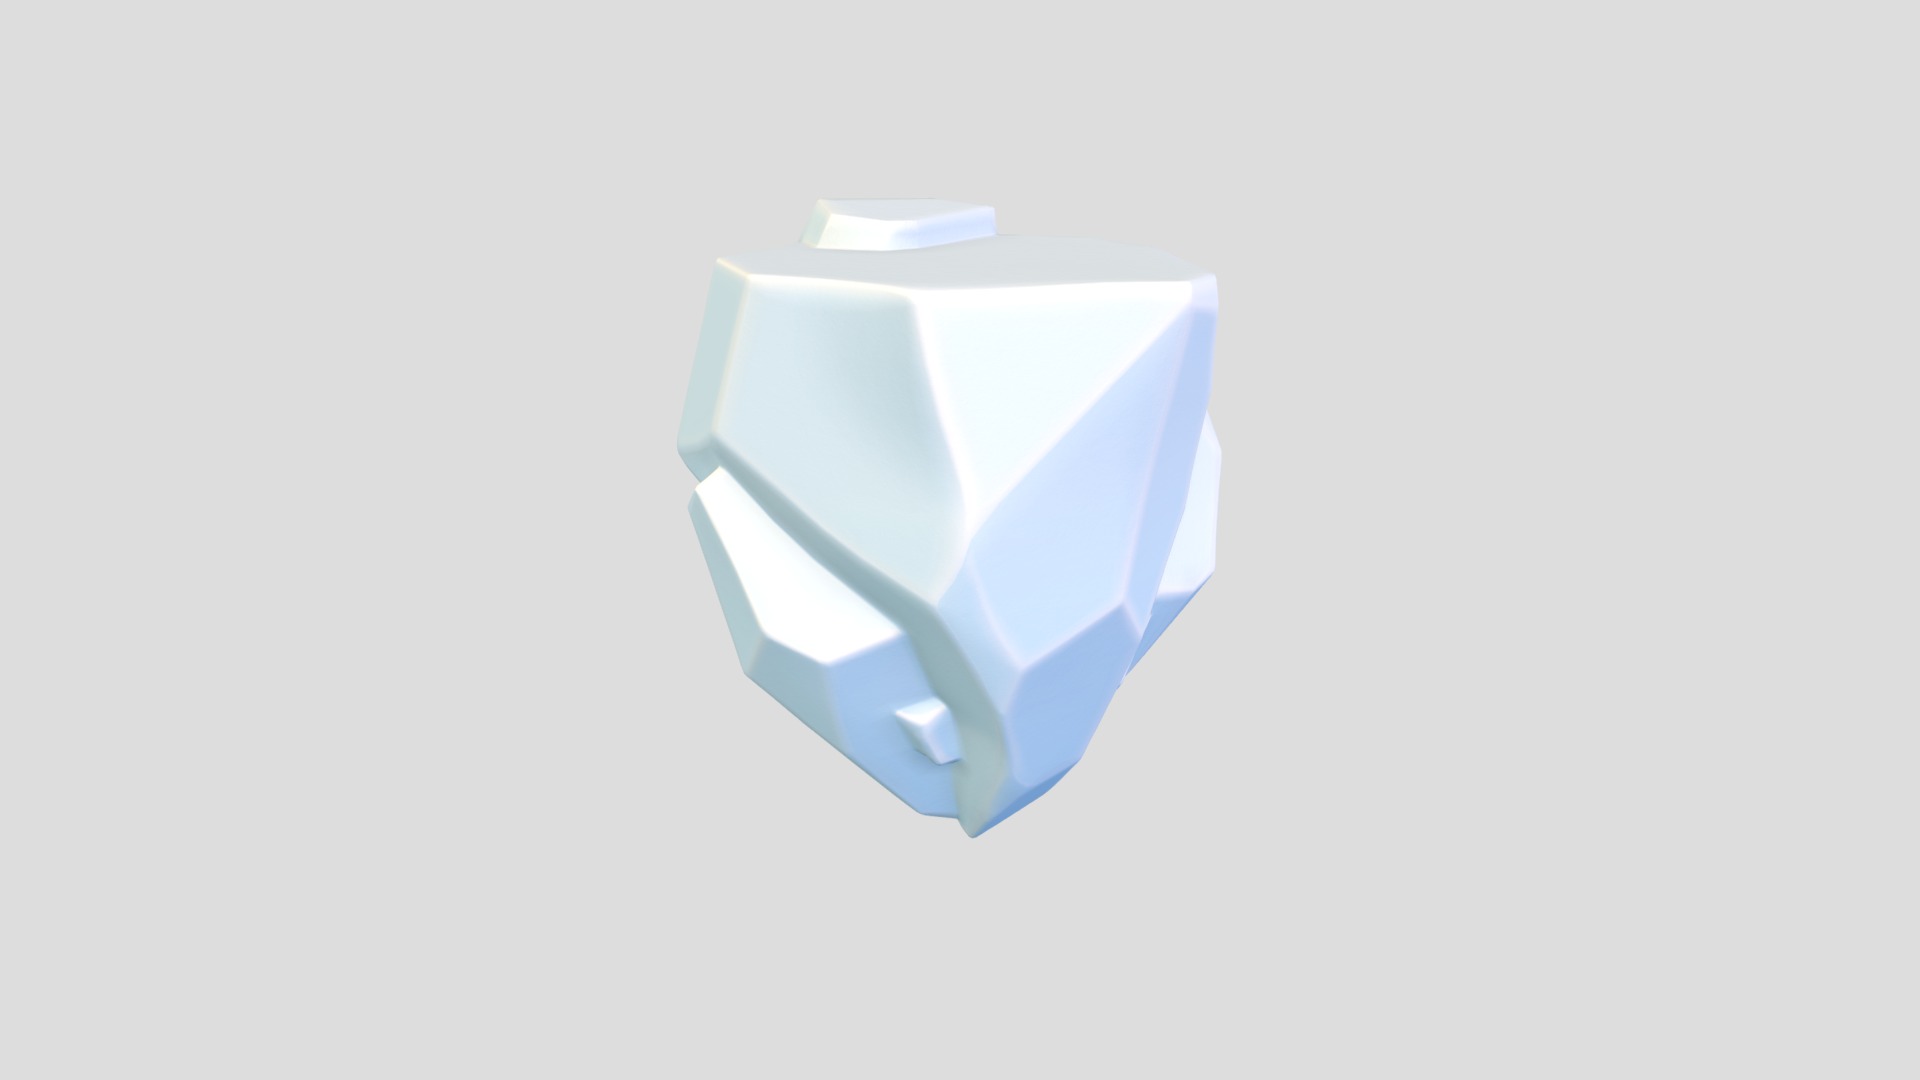 3D model Iceberg - This is a 3D model of the Iceberg. The 3D model is about a blue cube with a white background.